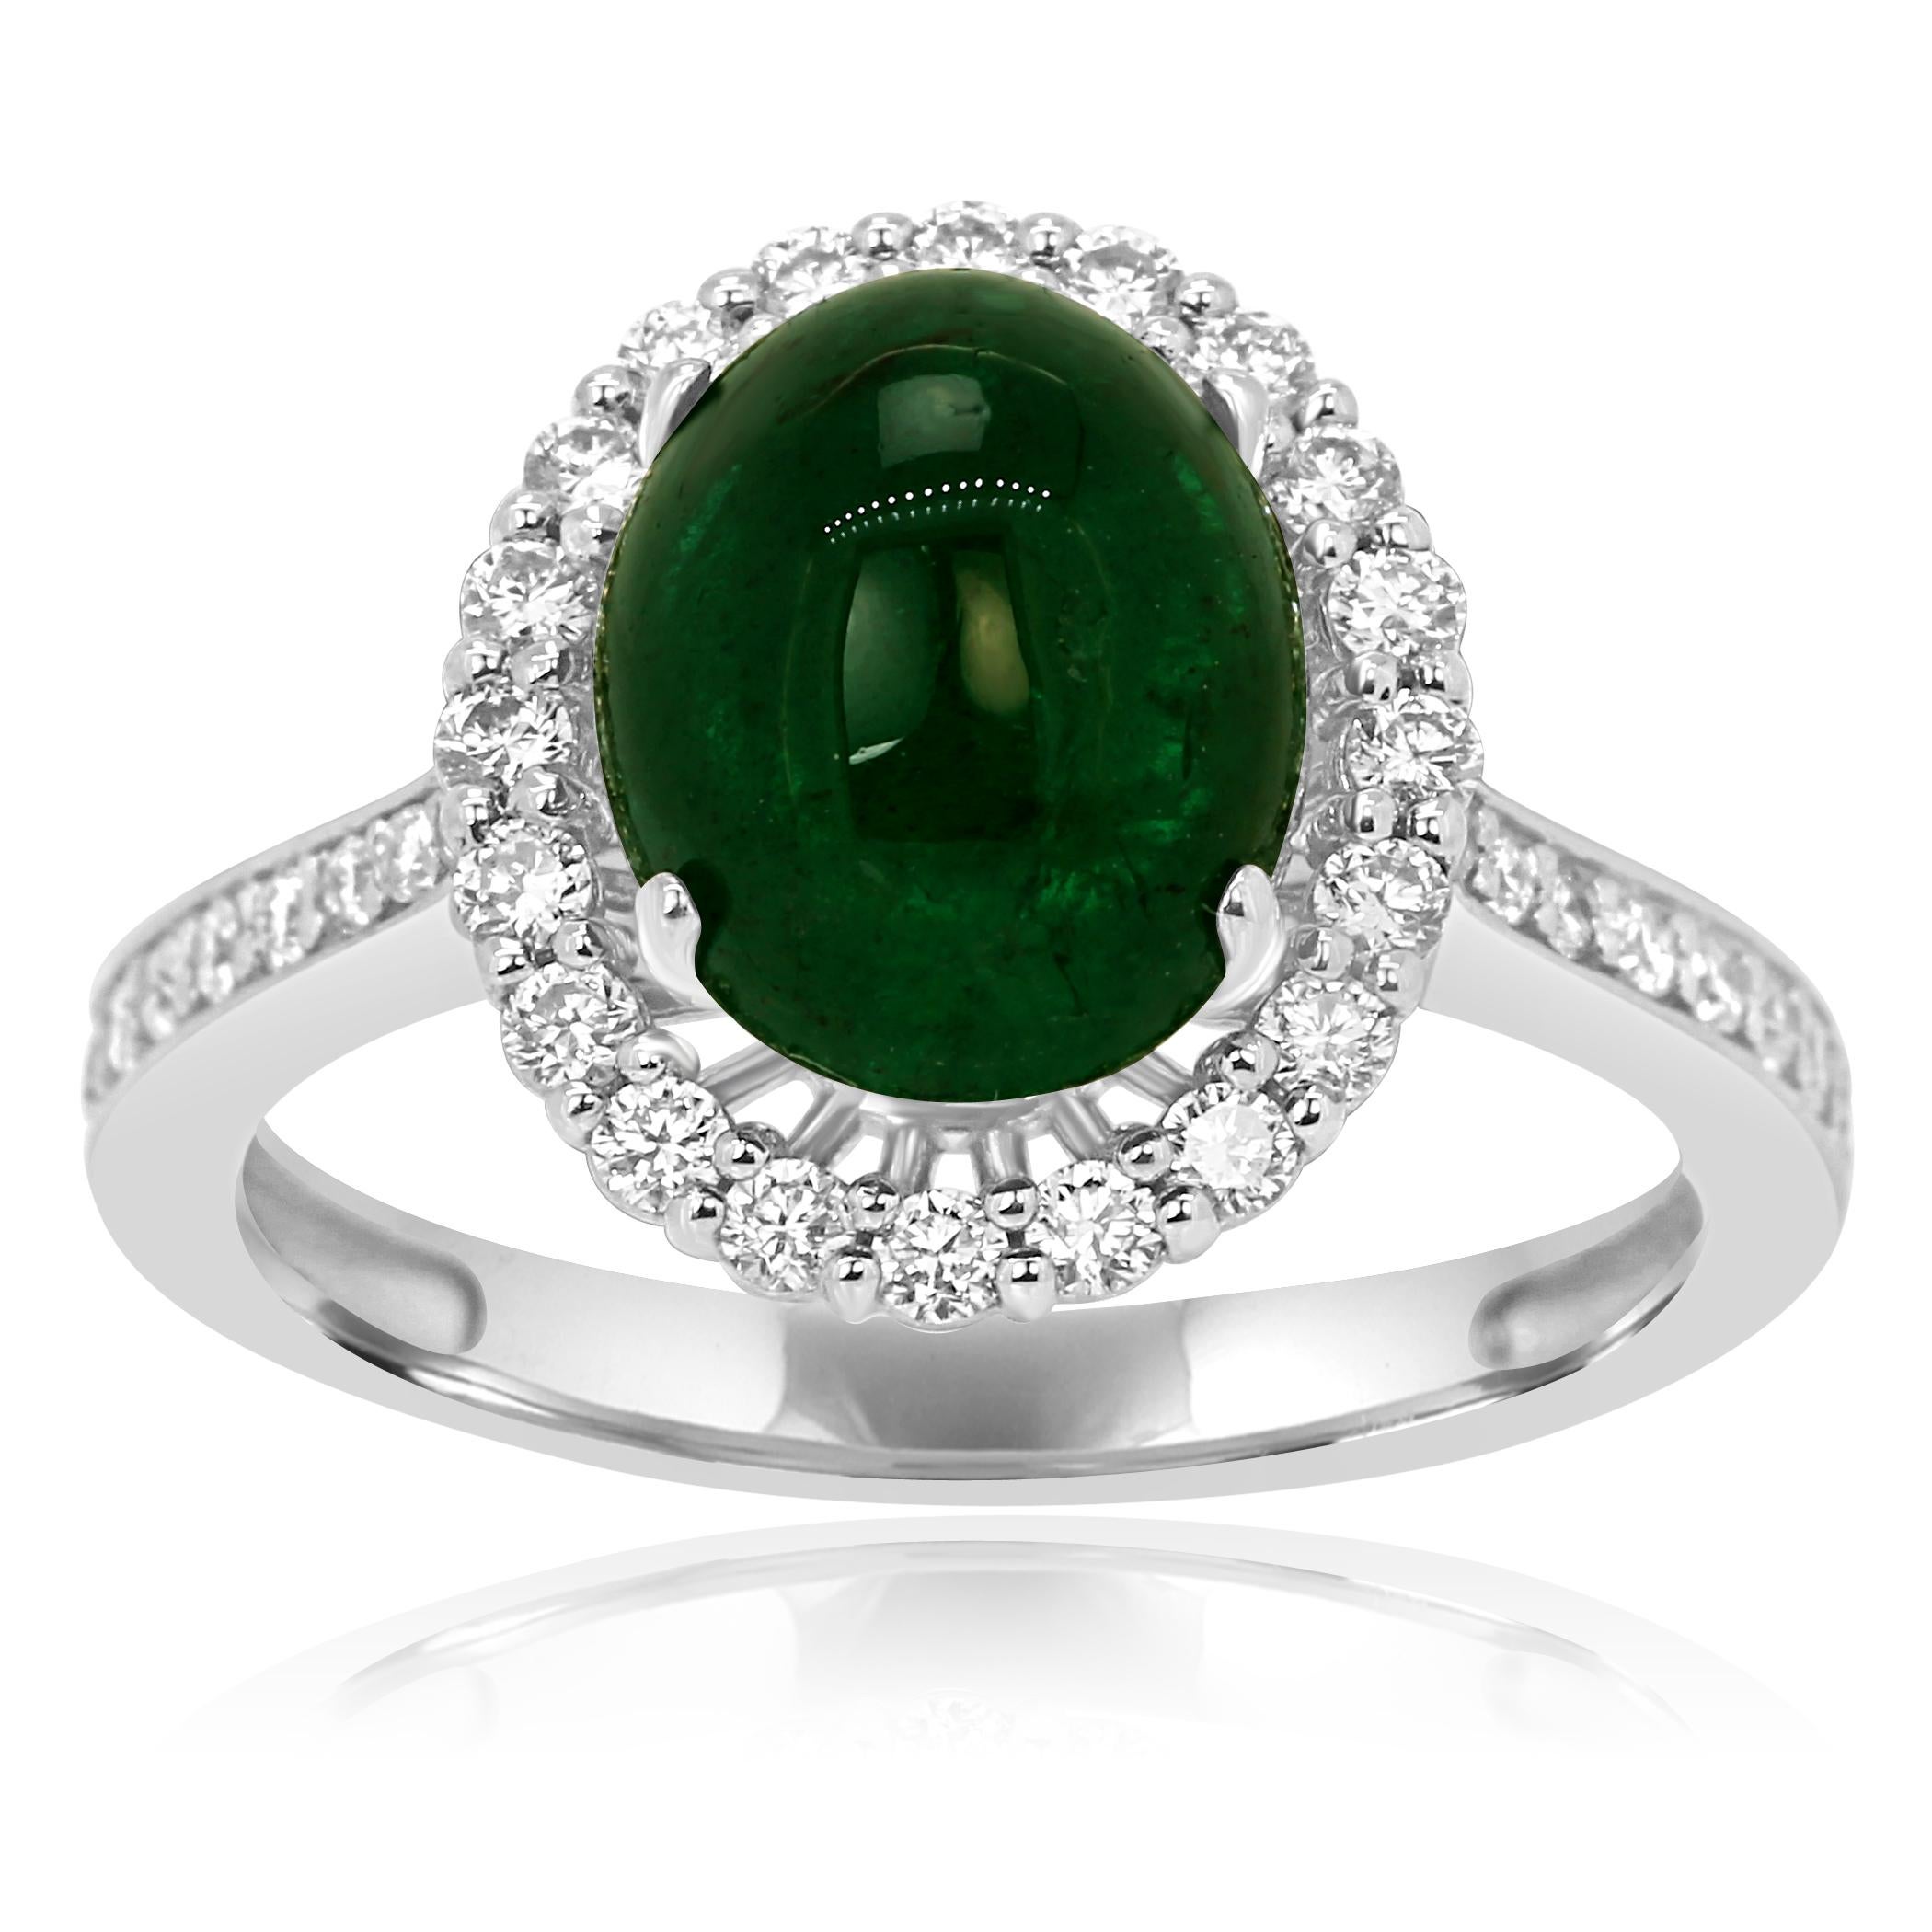 Gorgeous Emerald Oval Cabochon 3.06 Carat encircled in White Colorless Diamond VS-SI clarity 0.48 Carat Set in 14K White Gold Bridal Fashion Cocktail Ring 

Style available in different price ranges. Prices are based on your selection of 4C's Cut,